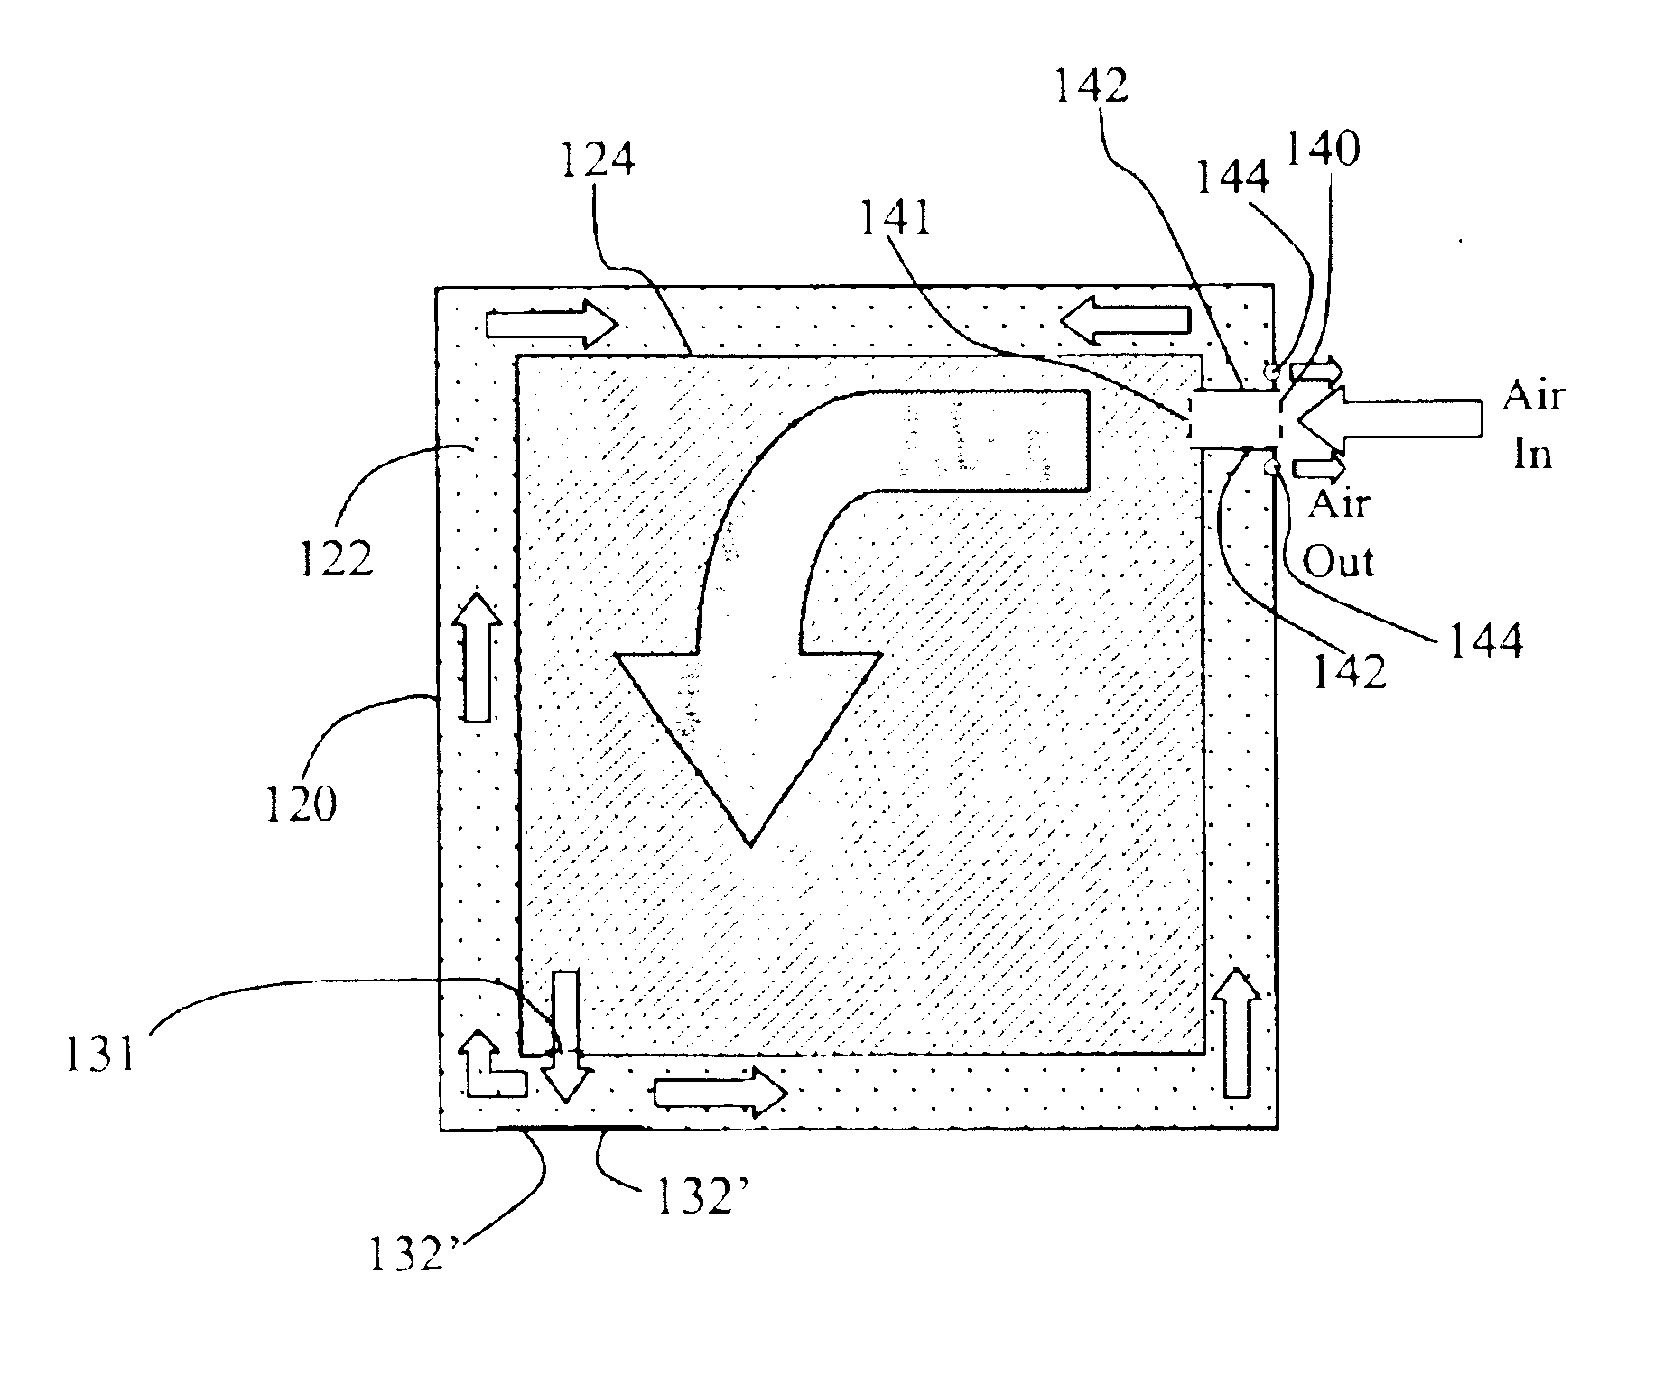 Metal air cell incorporating air flow system